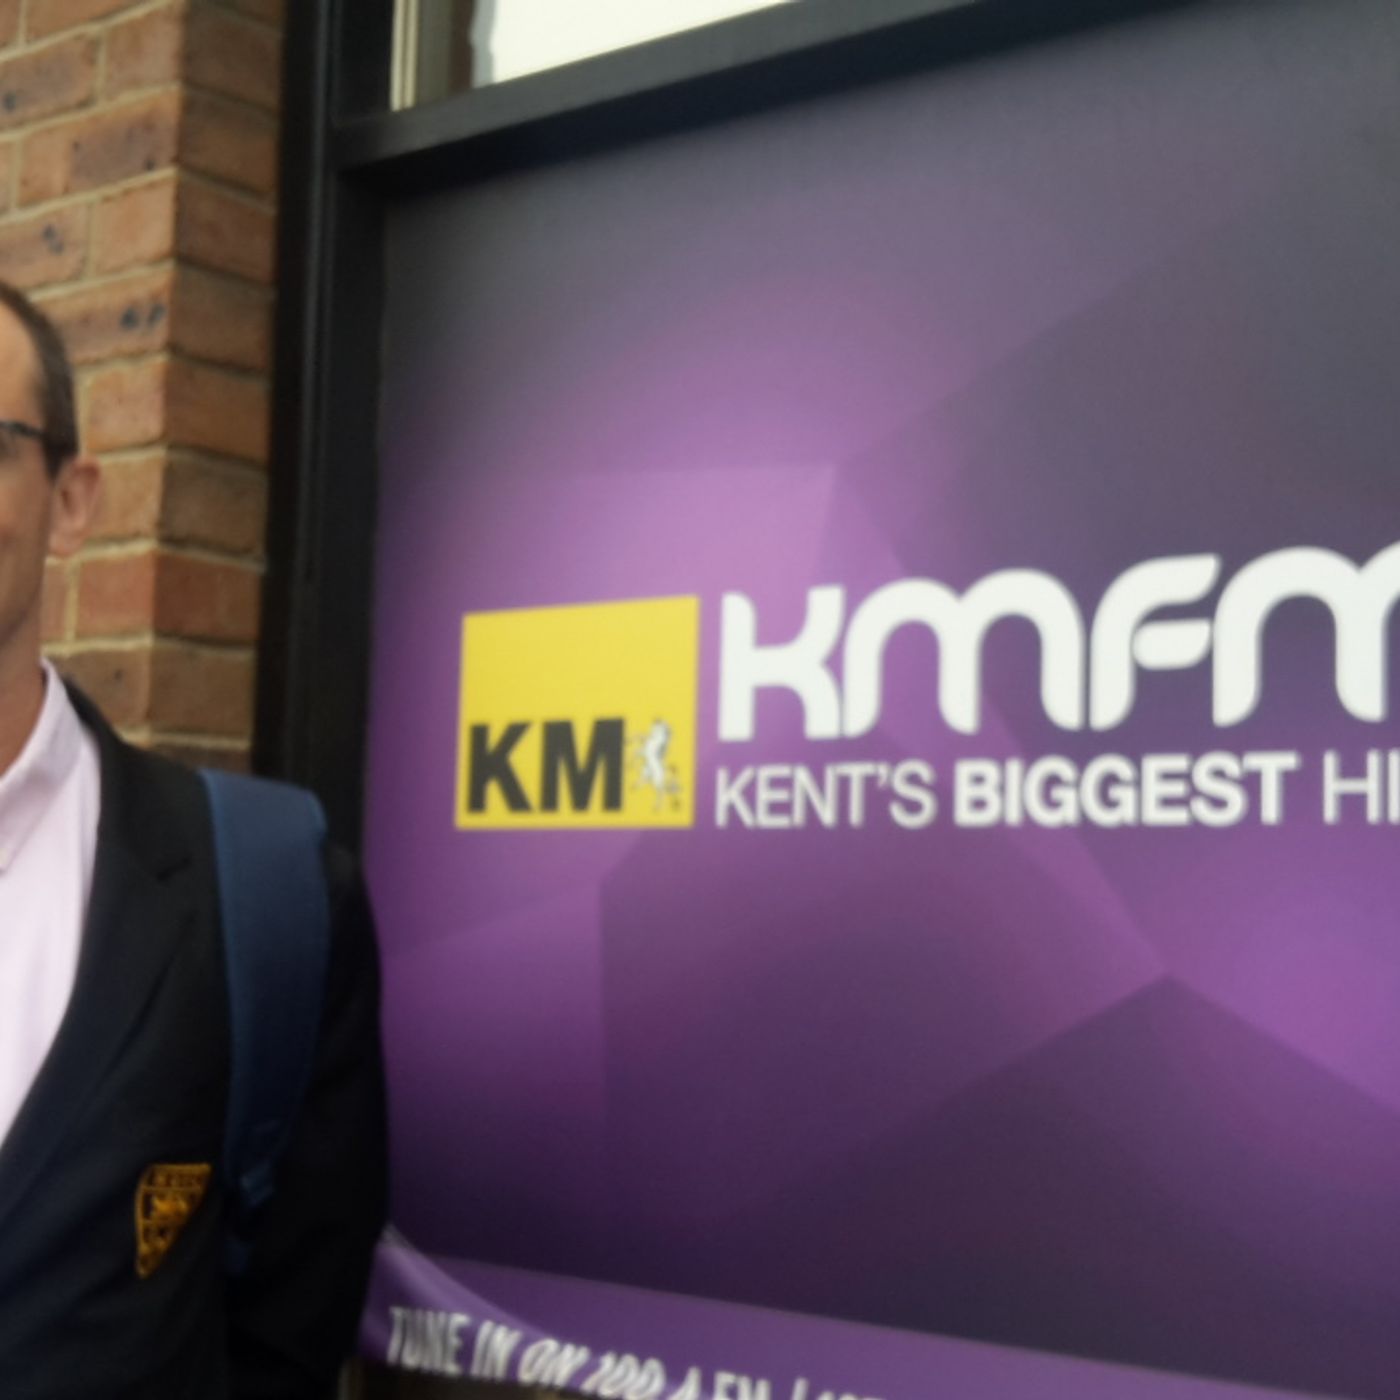 40: Oliver Ash joins the KM Sports Team to talk about owning Maidstone United, why Jay Saunders could return one day and calls for greater financial control in football